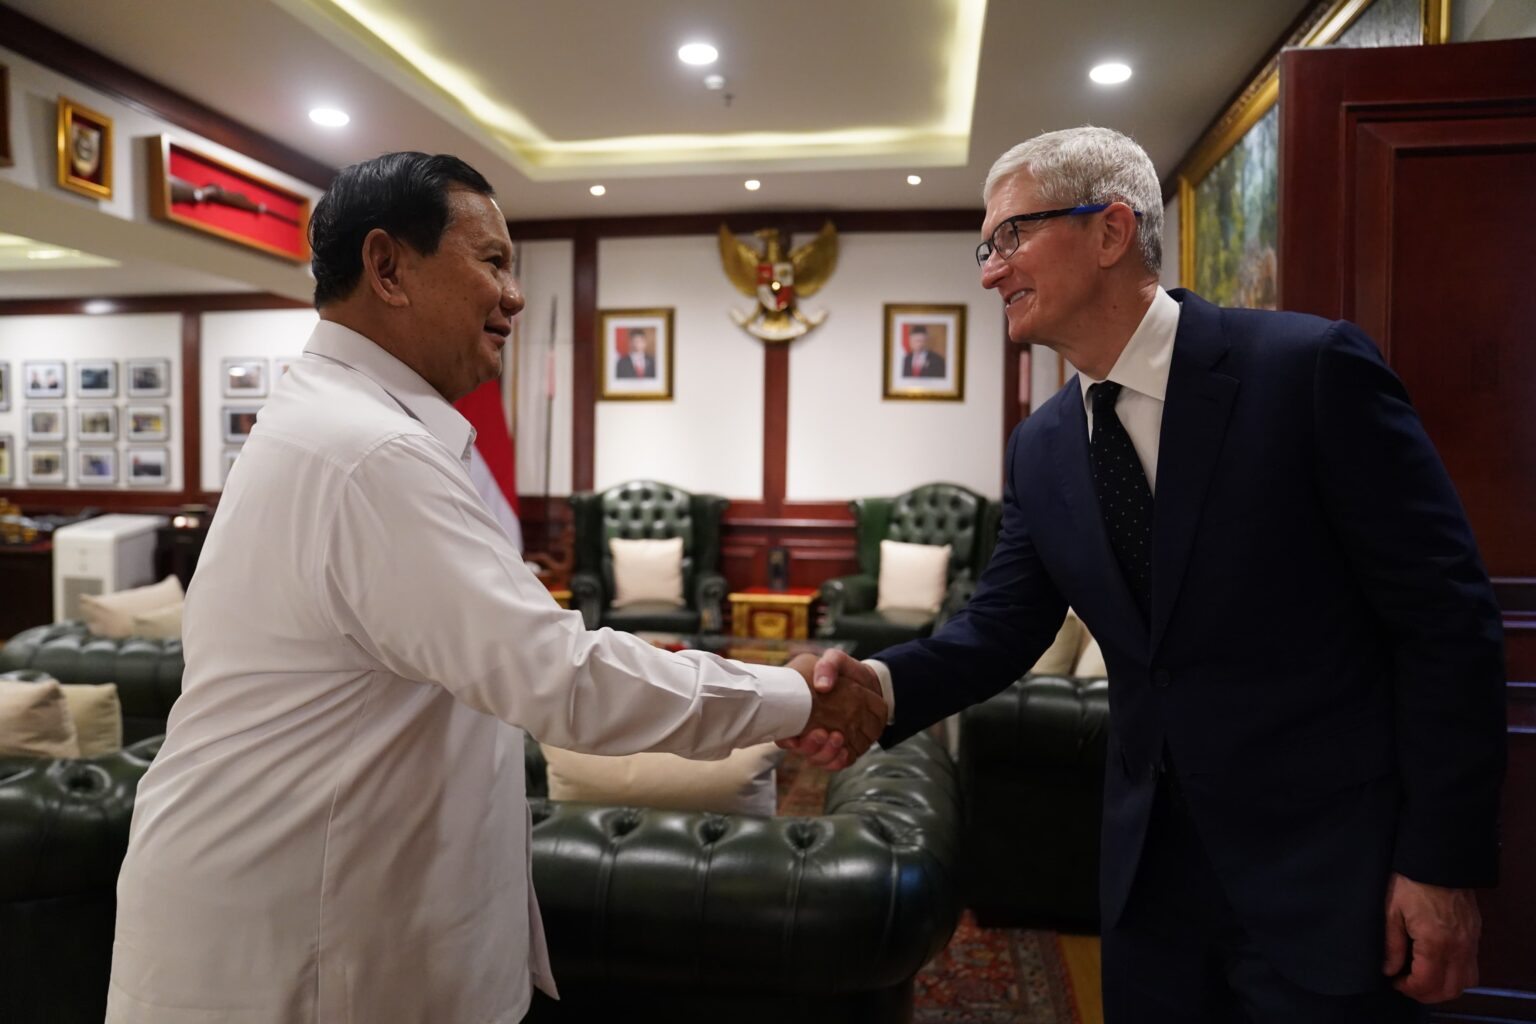 After Sending a Congratulatory Letter, Apple’s CEO Tim Cook Visits Prabowo Subianto, the President-Elect